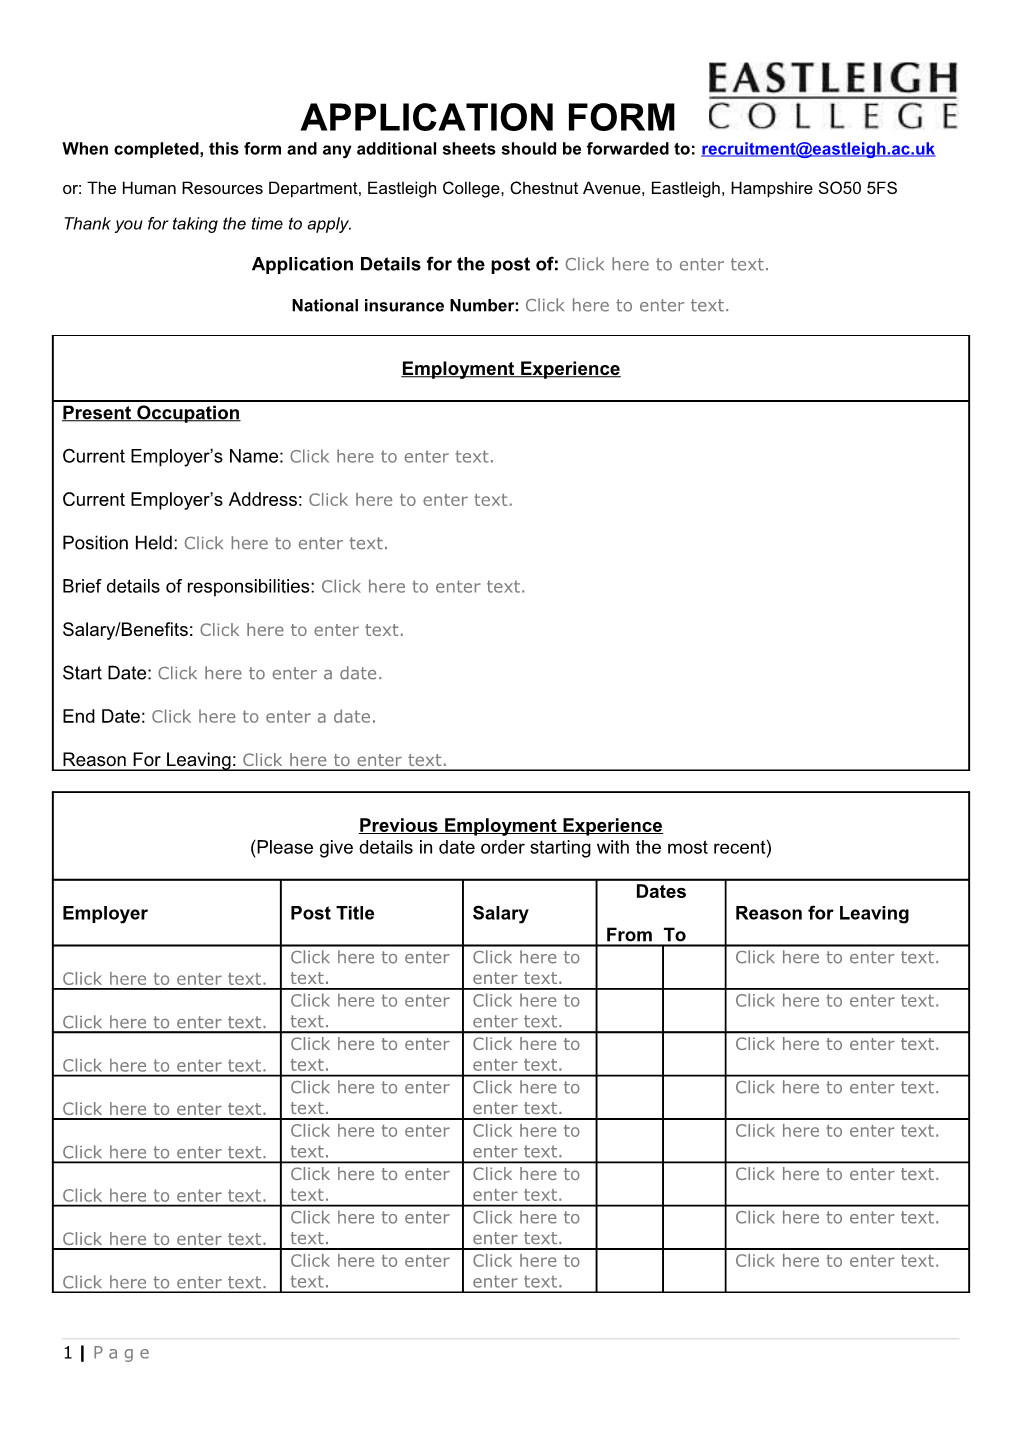 When Completed, This Form and Any Additional Sheets Should Be Forwarded To